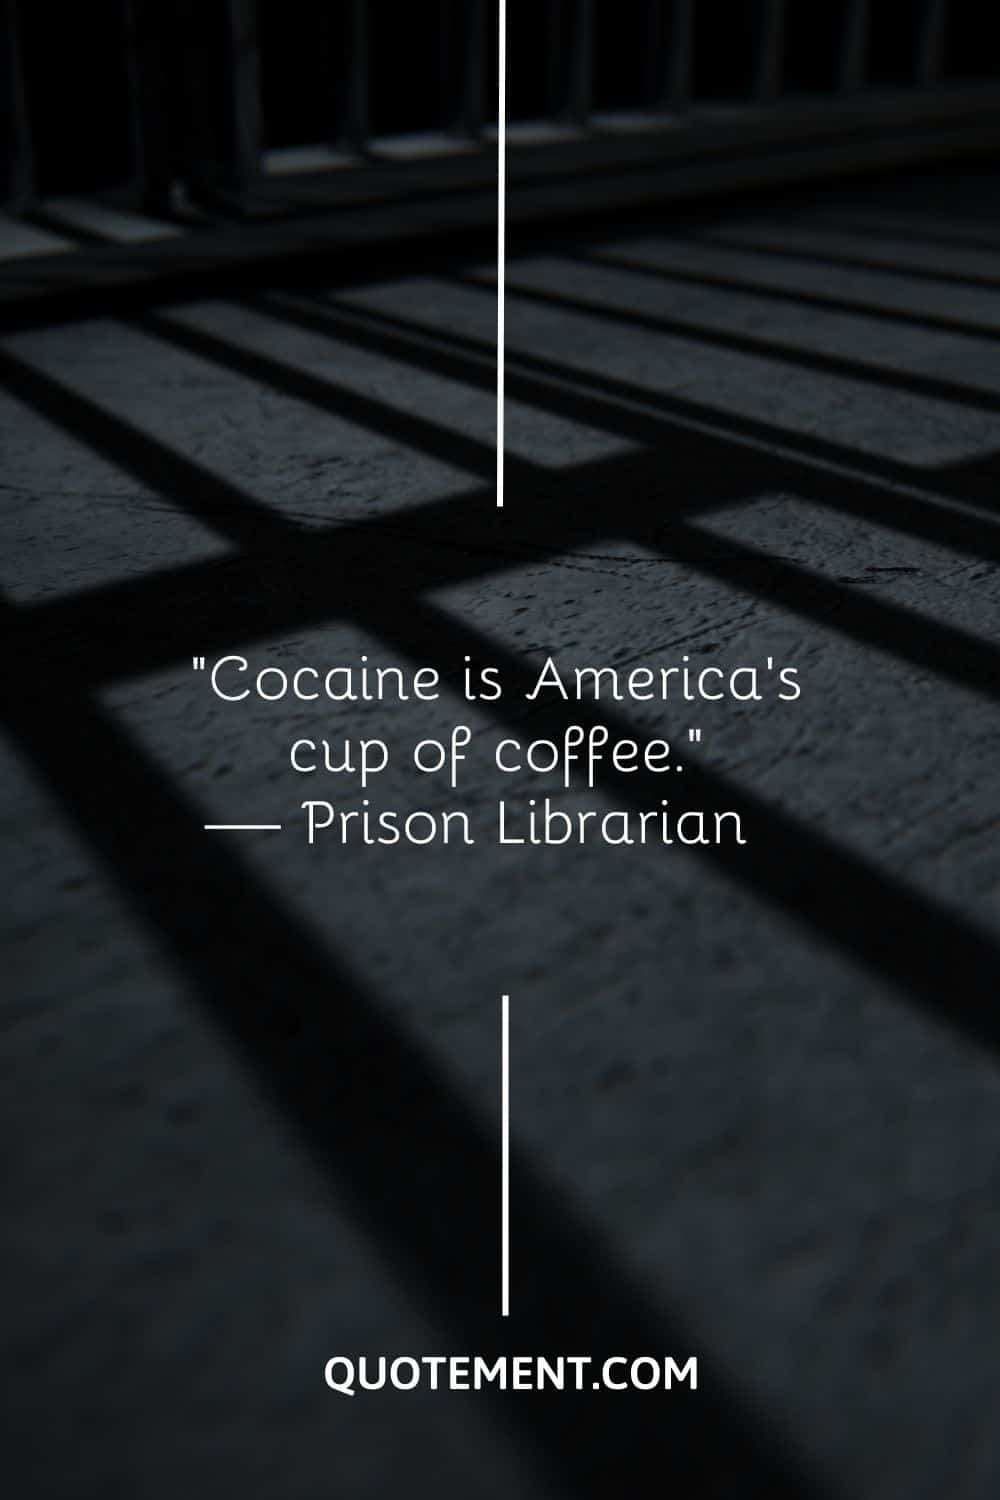 prison bars image representing blood in blood out quote